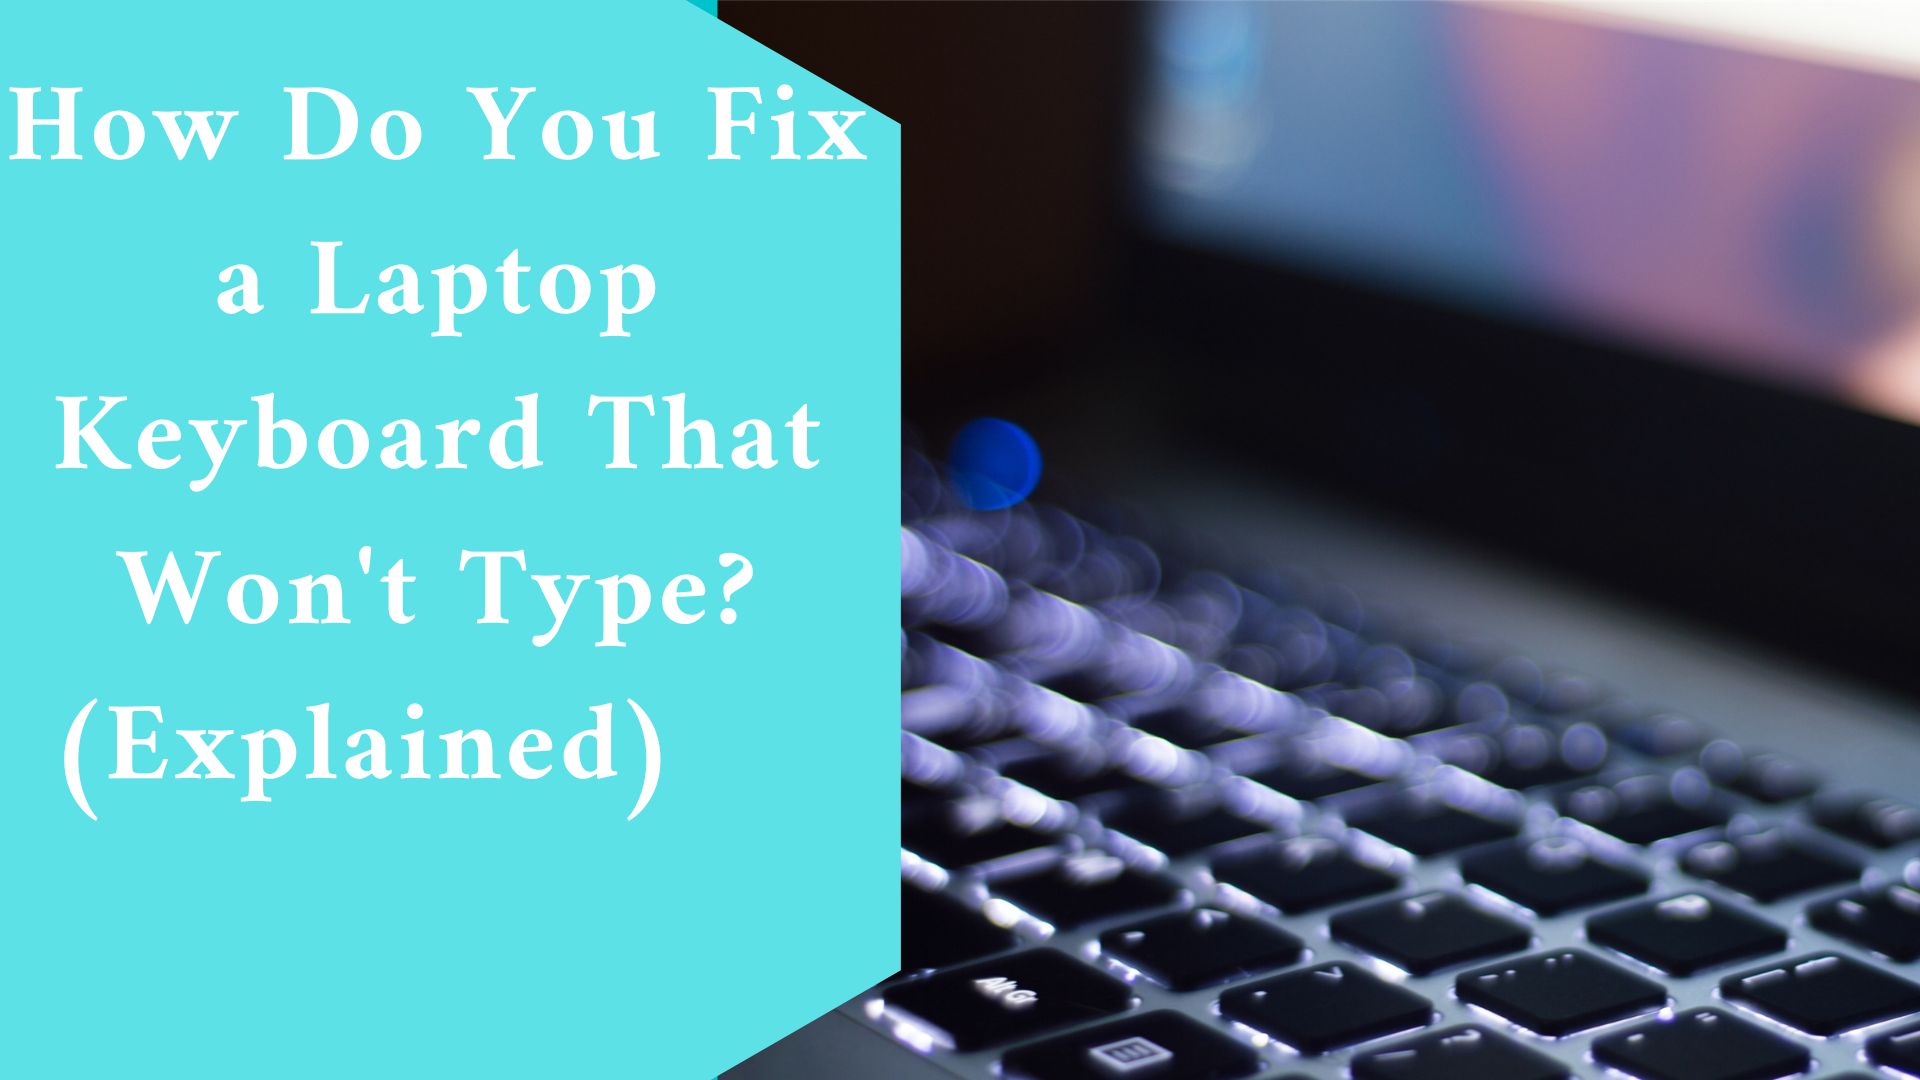 How Do You Fix a Laptop Keyboard That Won't Type? (Explained)